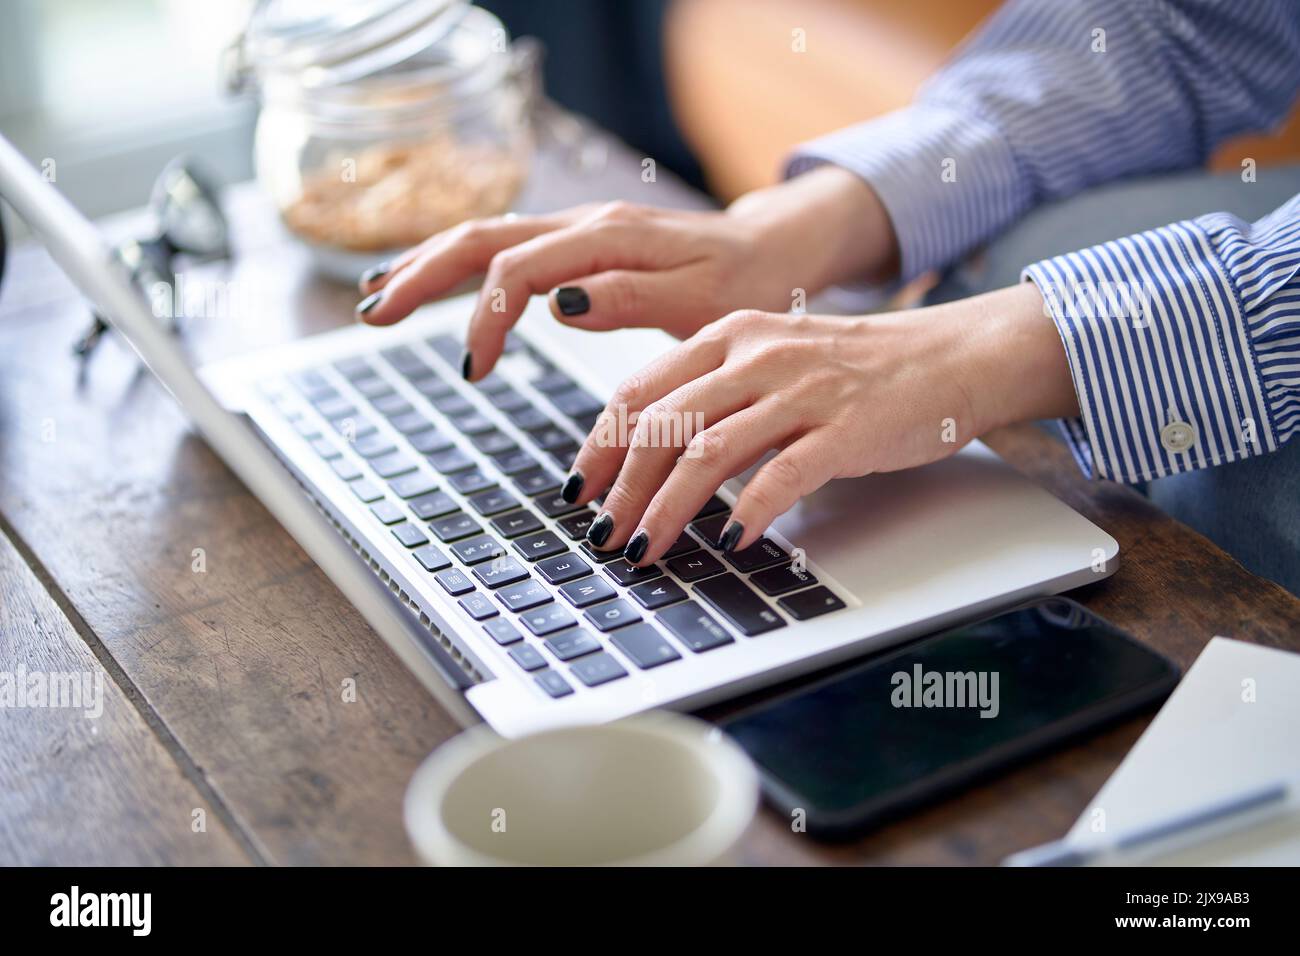 close-up shot of hands and fingers of an asian woman working from home using laptop computer Stock Photo